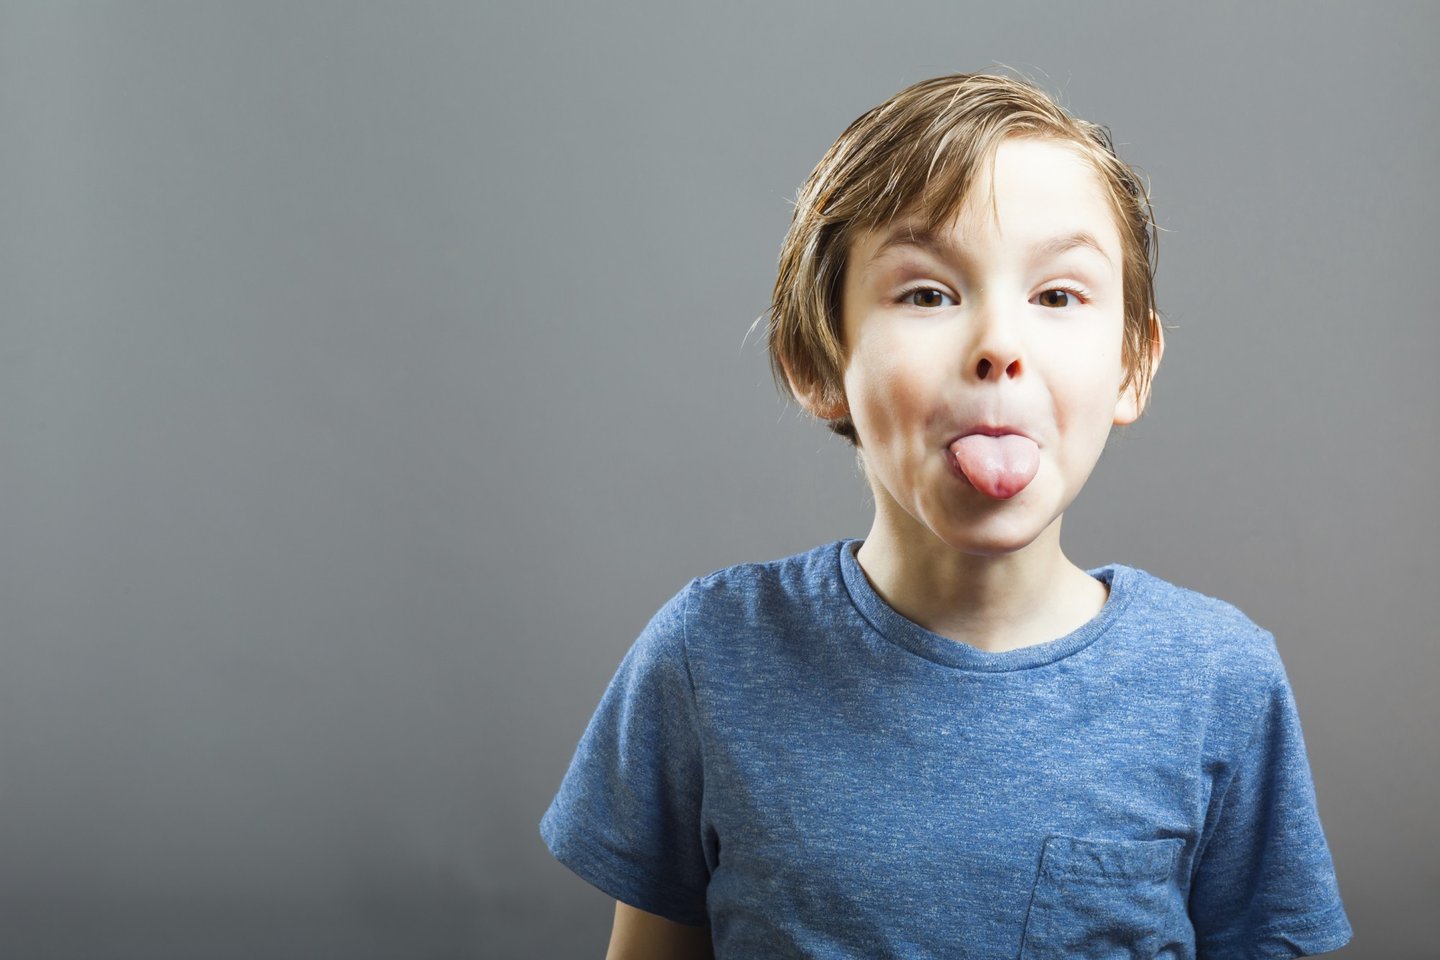 5 years, Gray, background, blue shirt, boy, child, copy space, cute, expression, face, fun, funny, grey, joking, kid, making faces, naughty, one, people, person, portrait, preschooler, sticking out, sticking out tongue, tongue, 